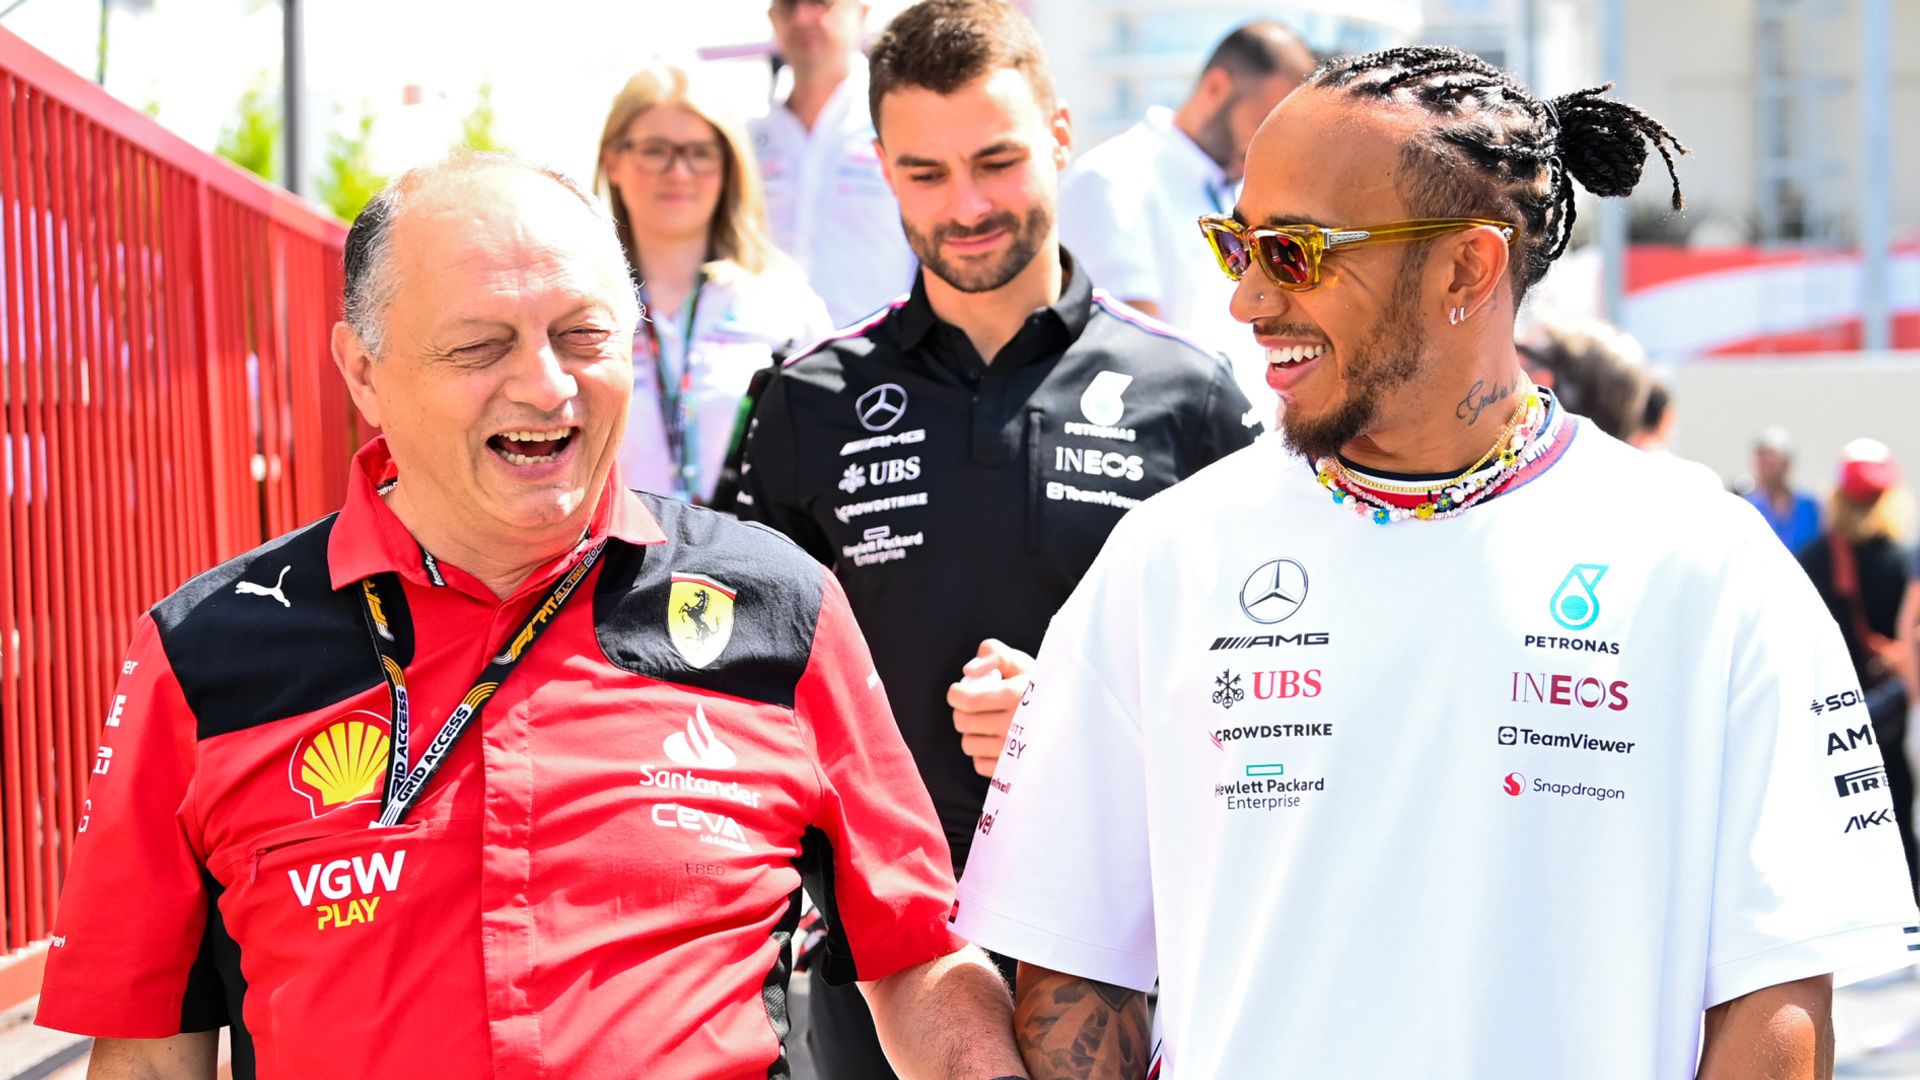 Hamilton future 360: What's going on with Mercedes contract amid Ferrari links?